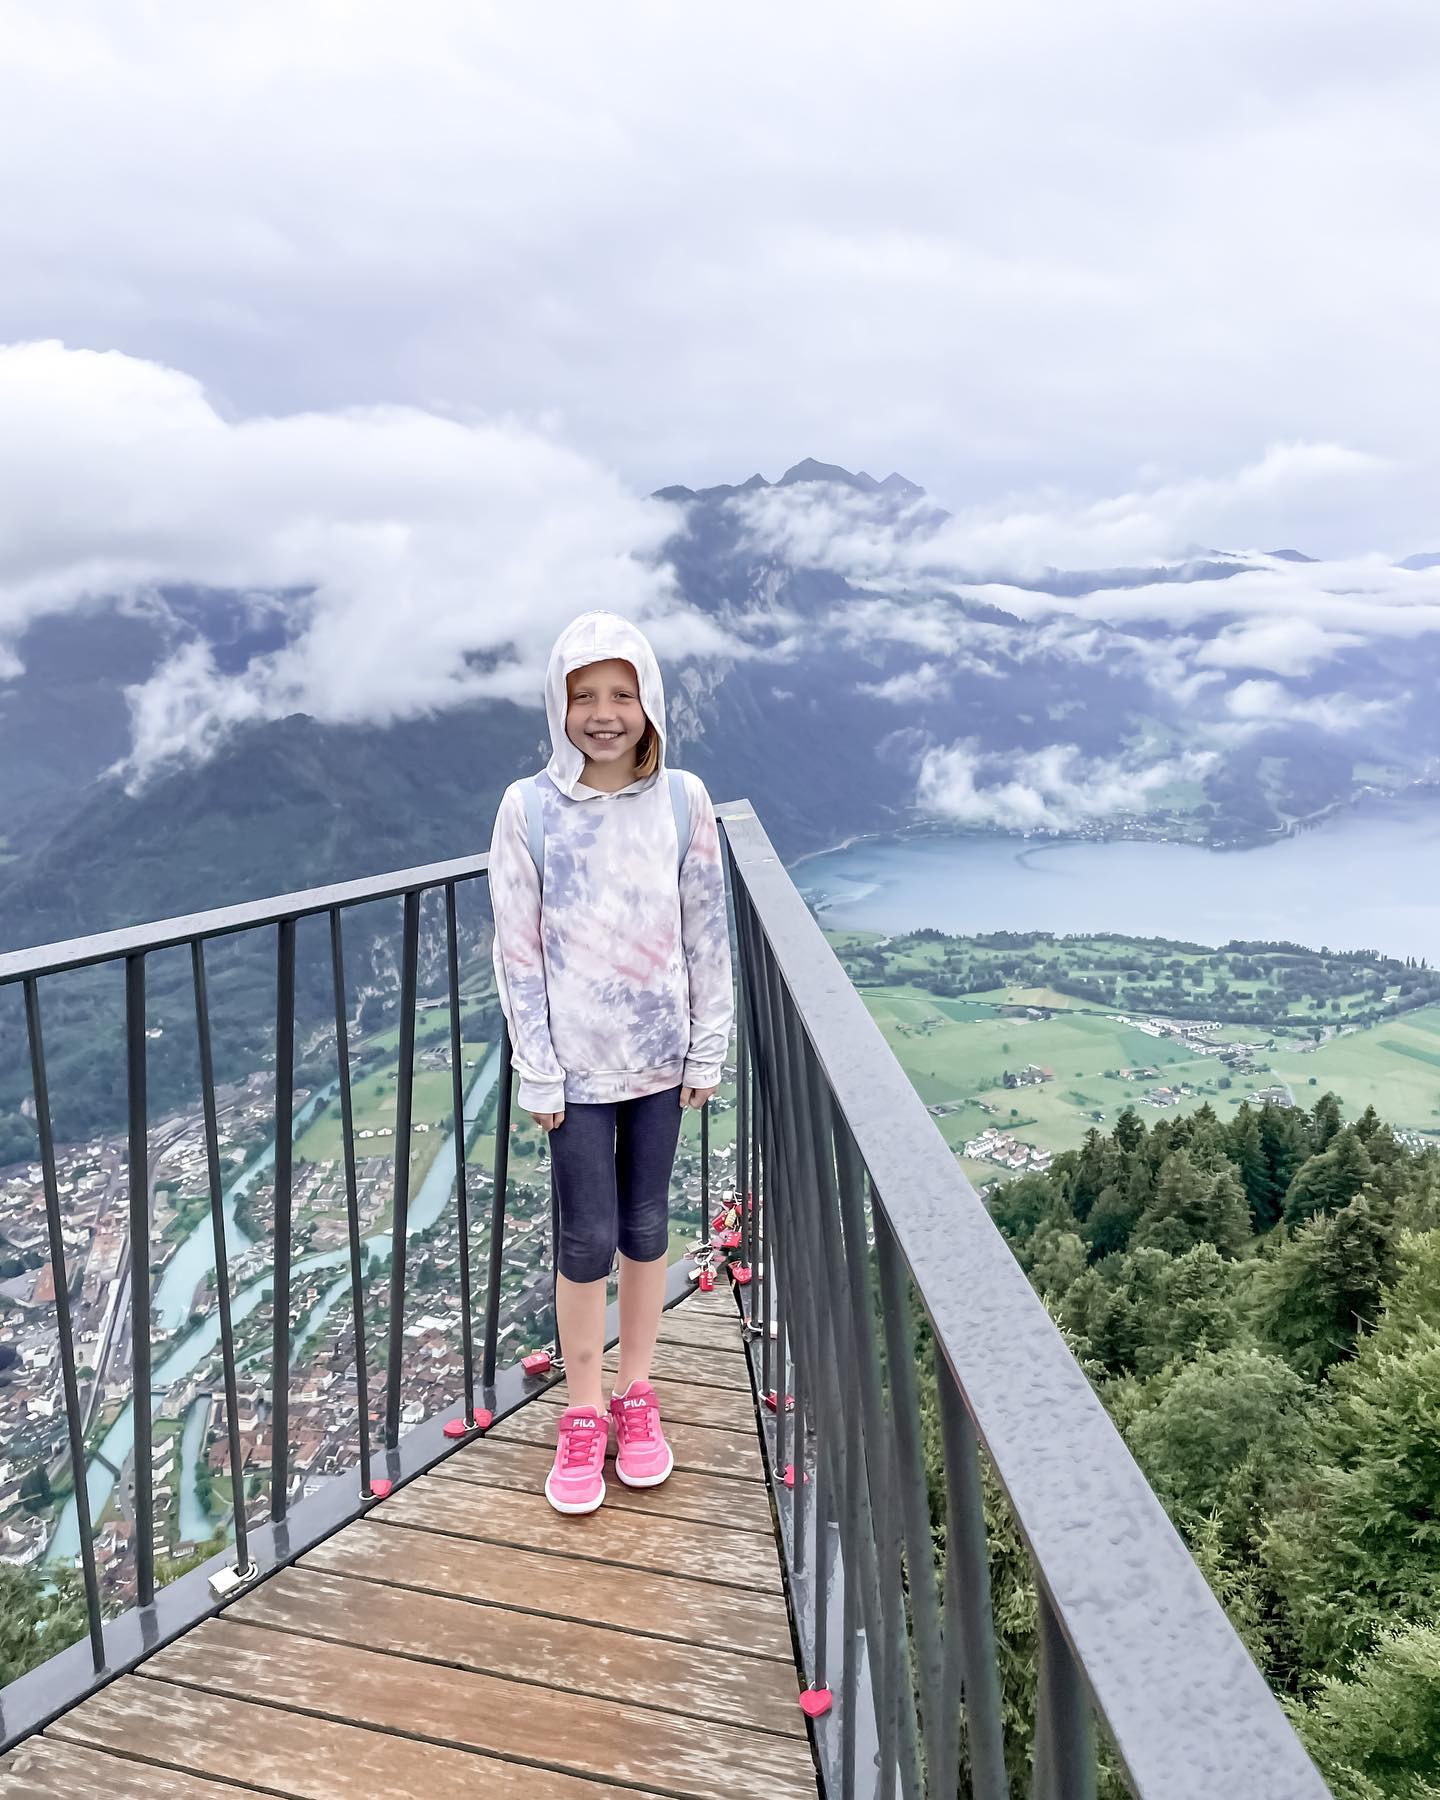 Harder Kulm lookout in Interlaken - 60 Places to Visit During Your Time in Switzerland